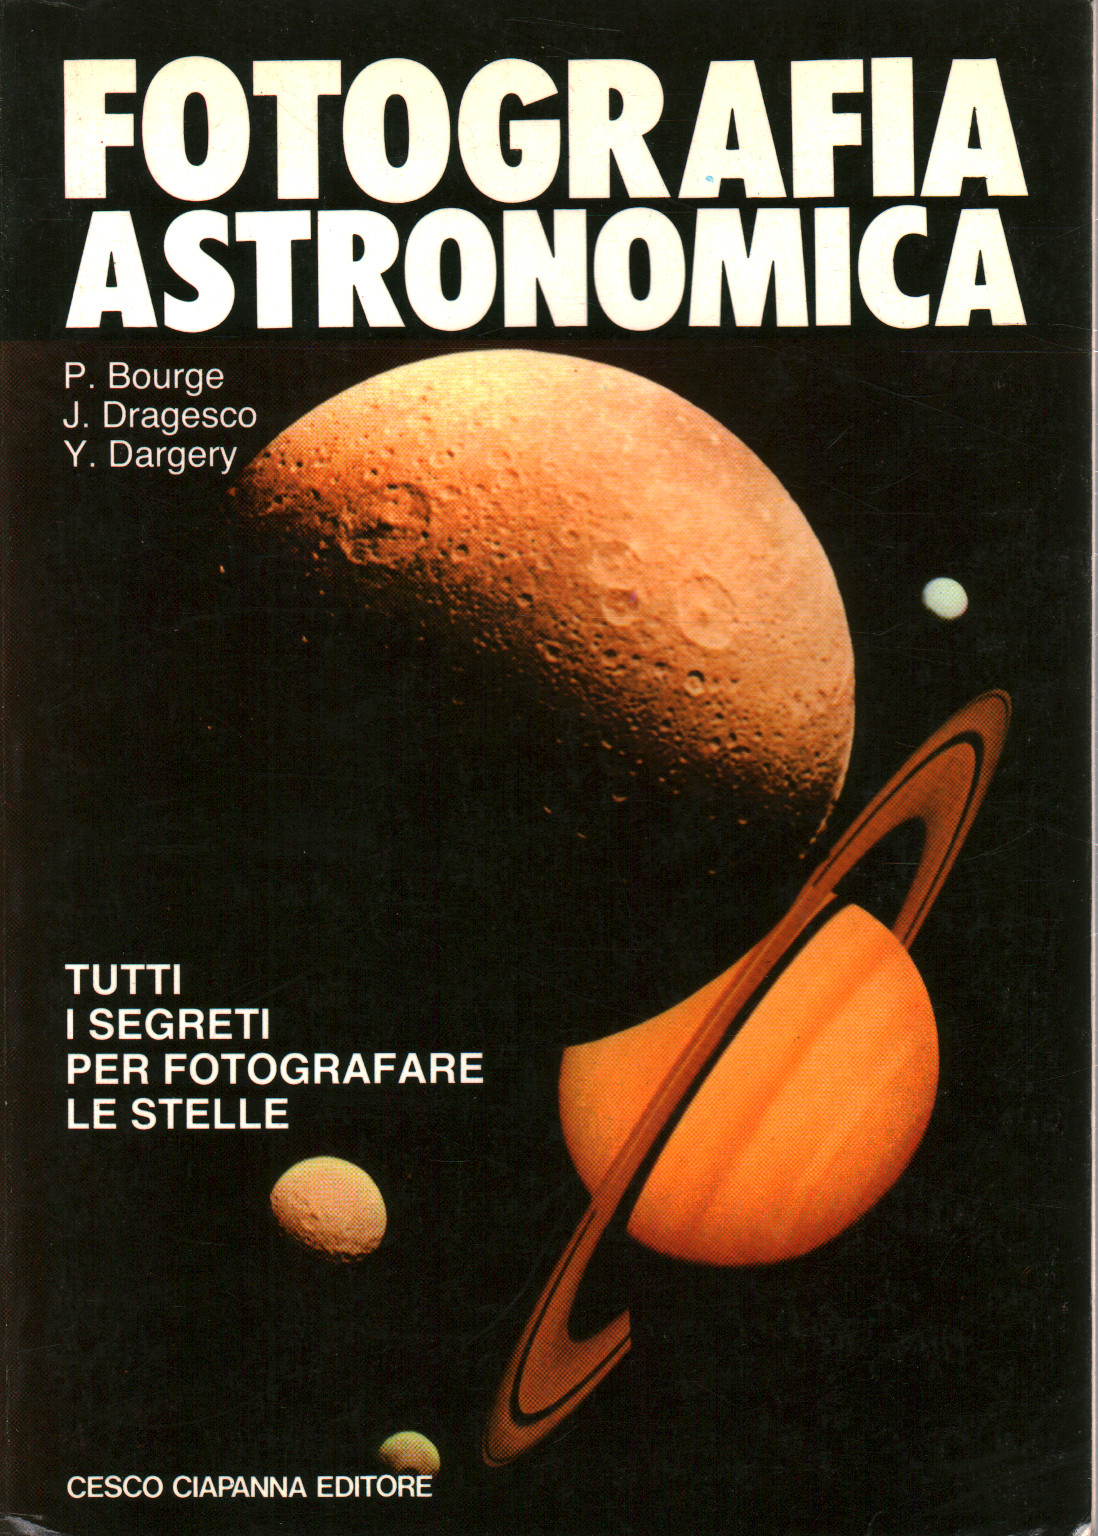 In astronomical photography, s.a.